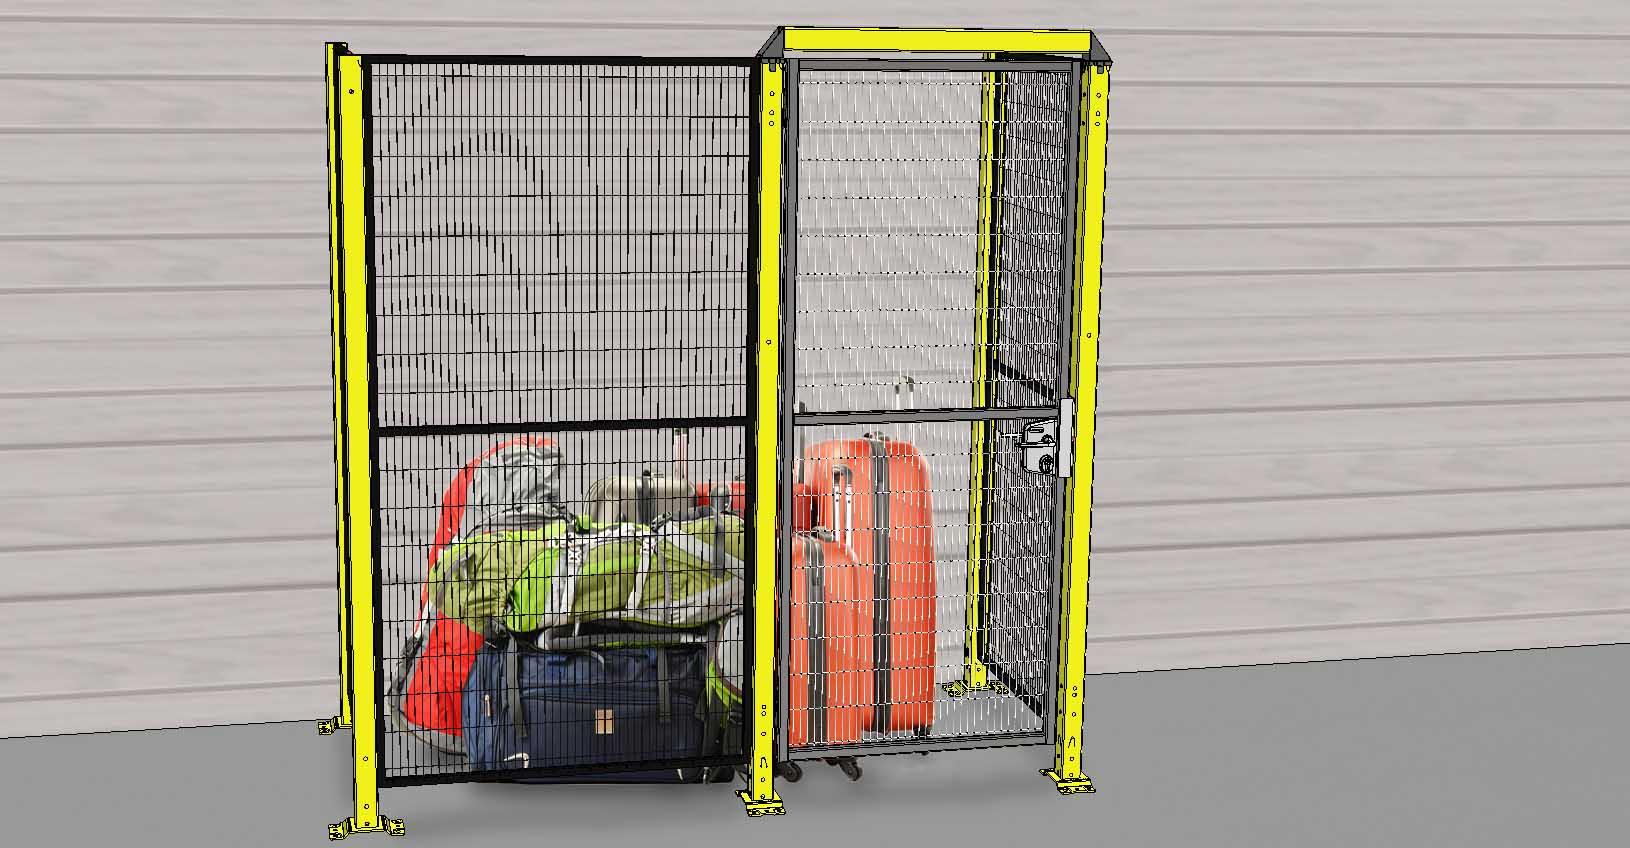 Suppliers of Lockable Storage Cages